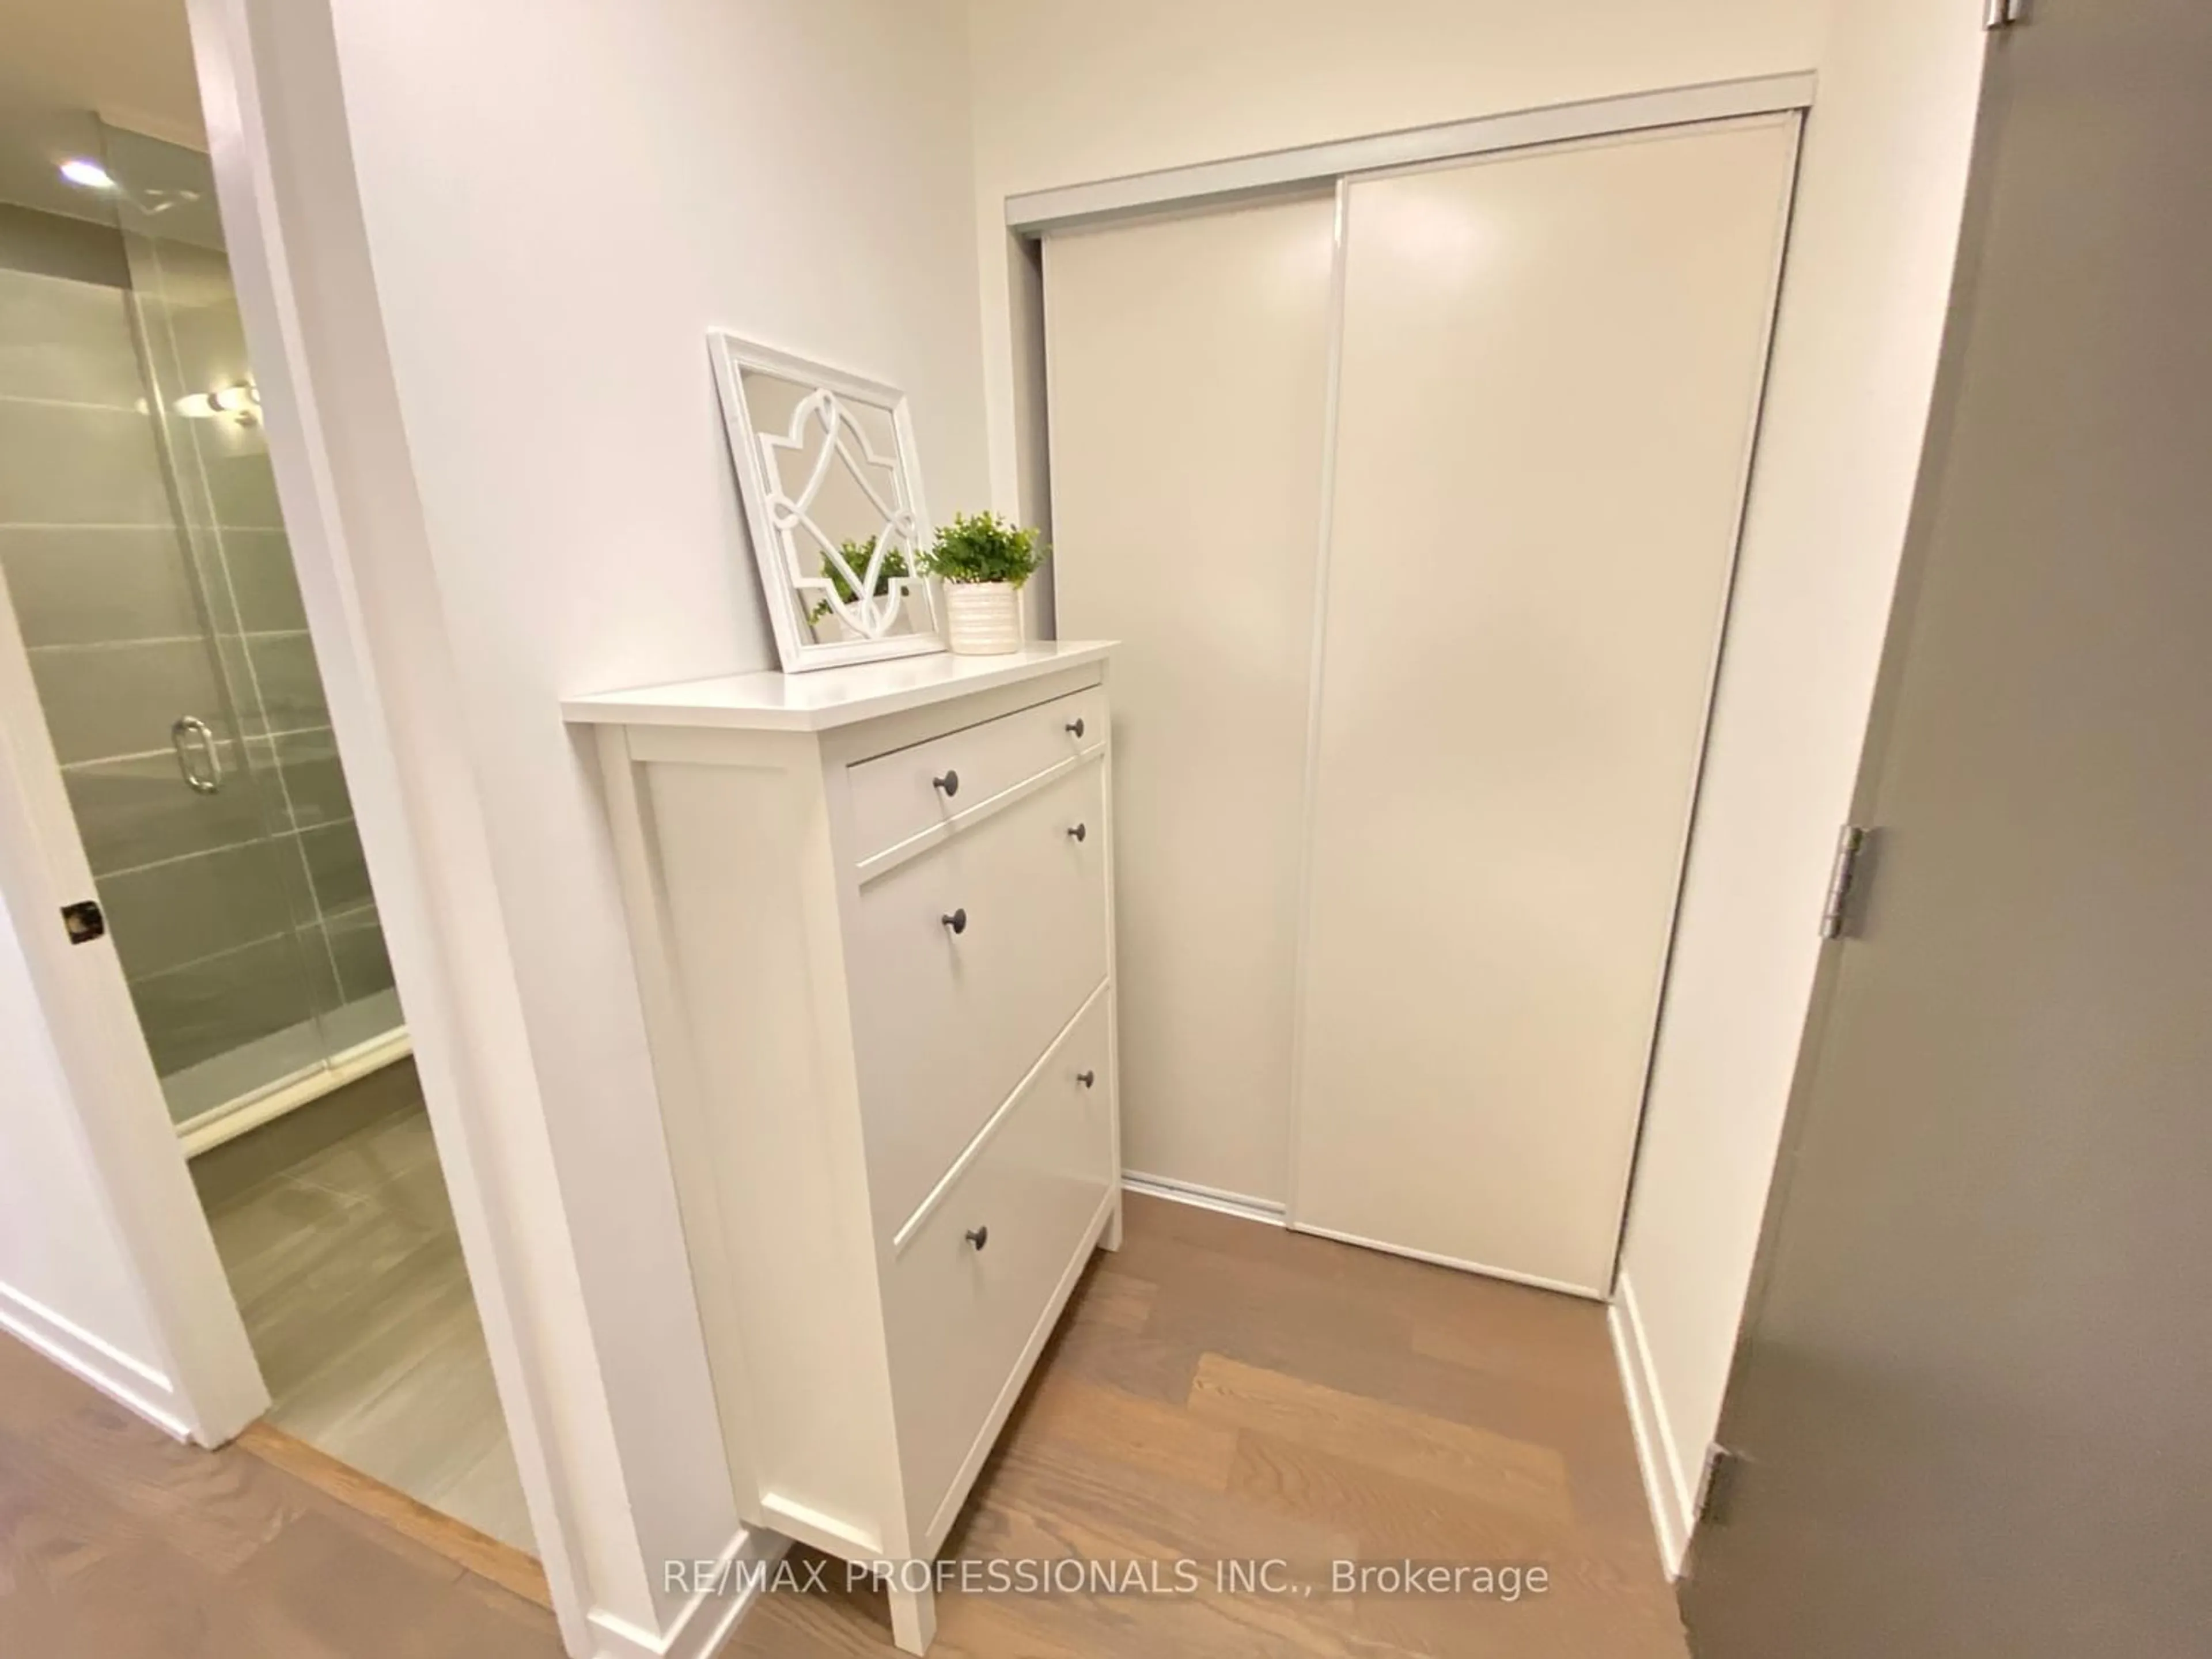 Storage room or clothes room or walk-in closet for 1350 Kingston Rd #208, Toronto Ontario M1N 1P9